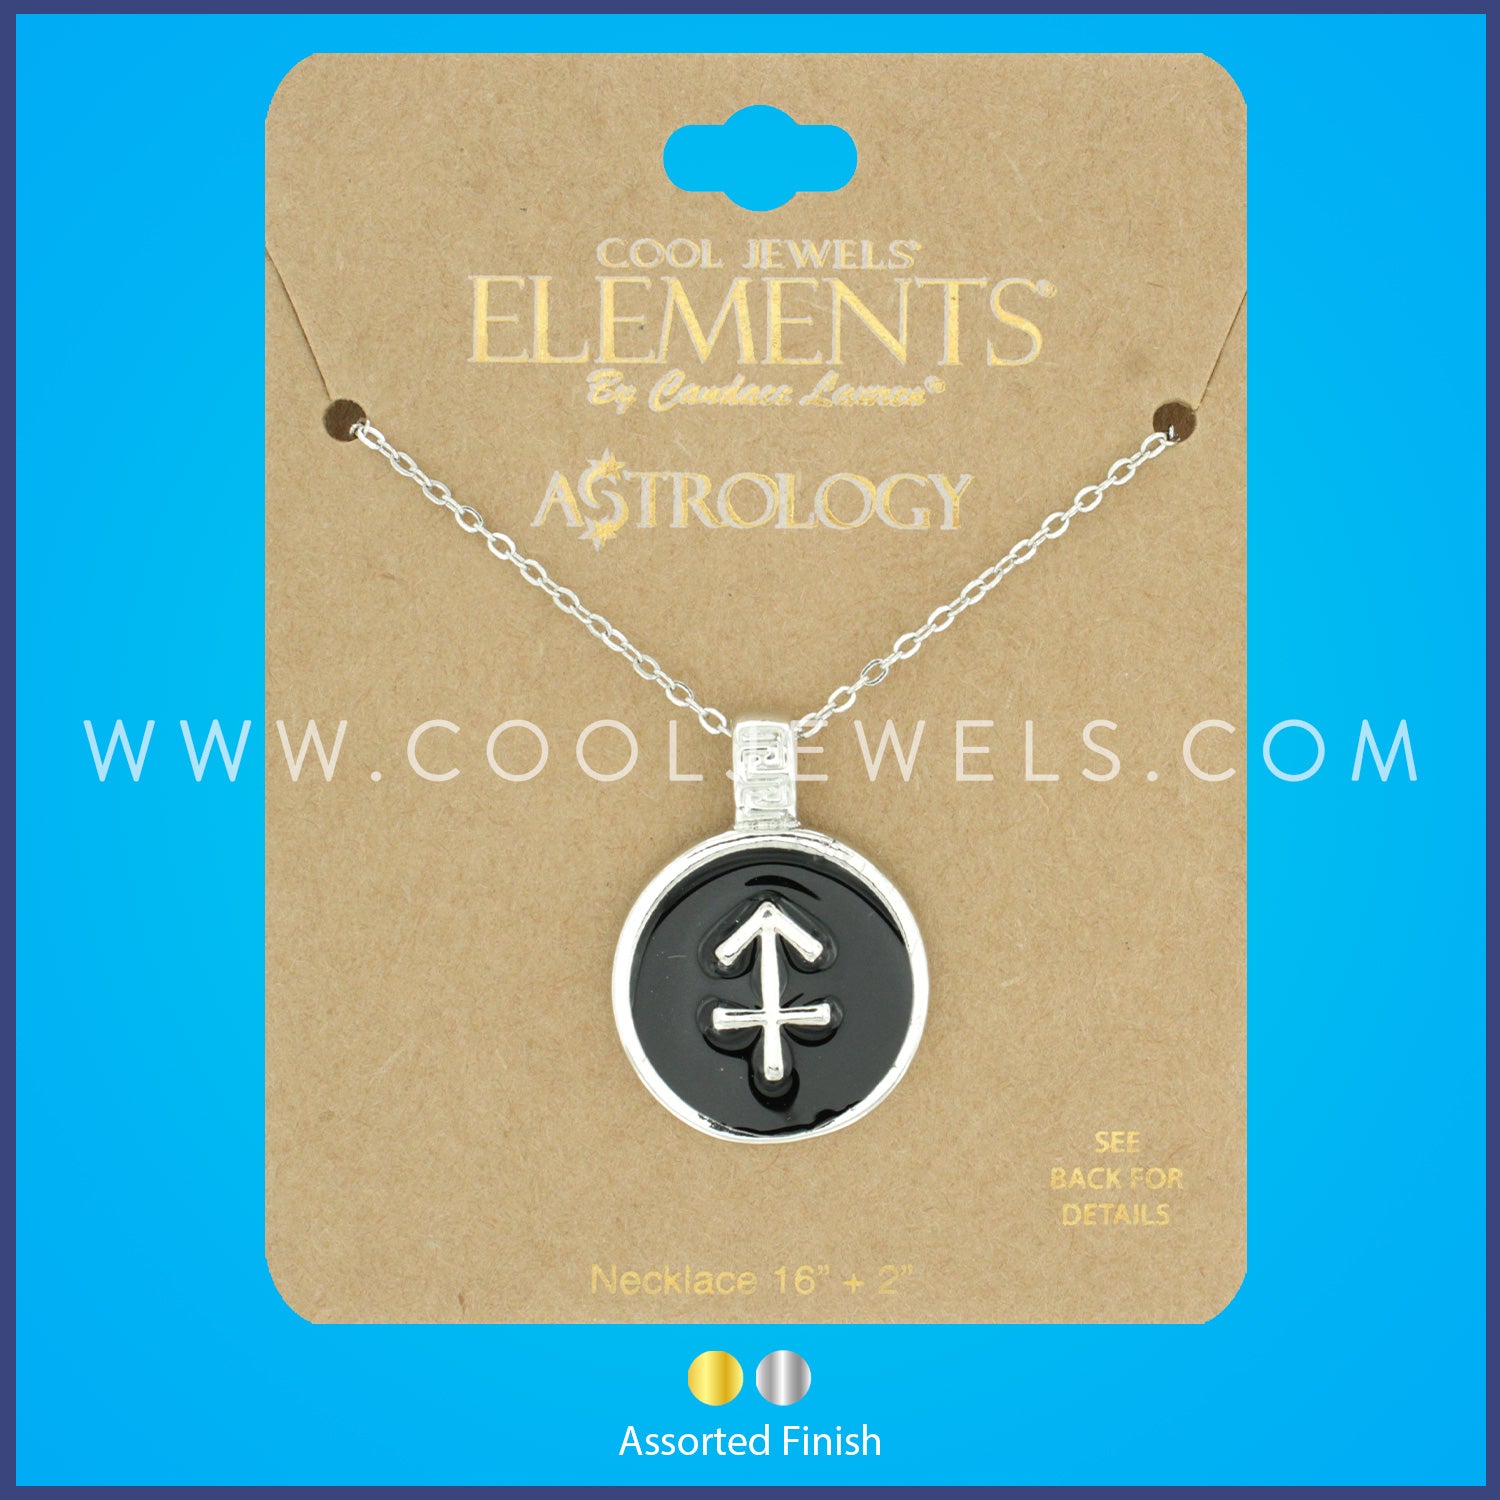 LINK CHAIN NECKLACE WITH ROUND ENAMEL SAGITTARIUS ZODIAC PENDANT - CARDED